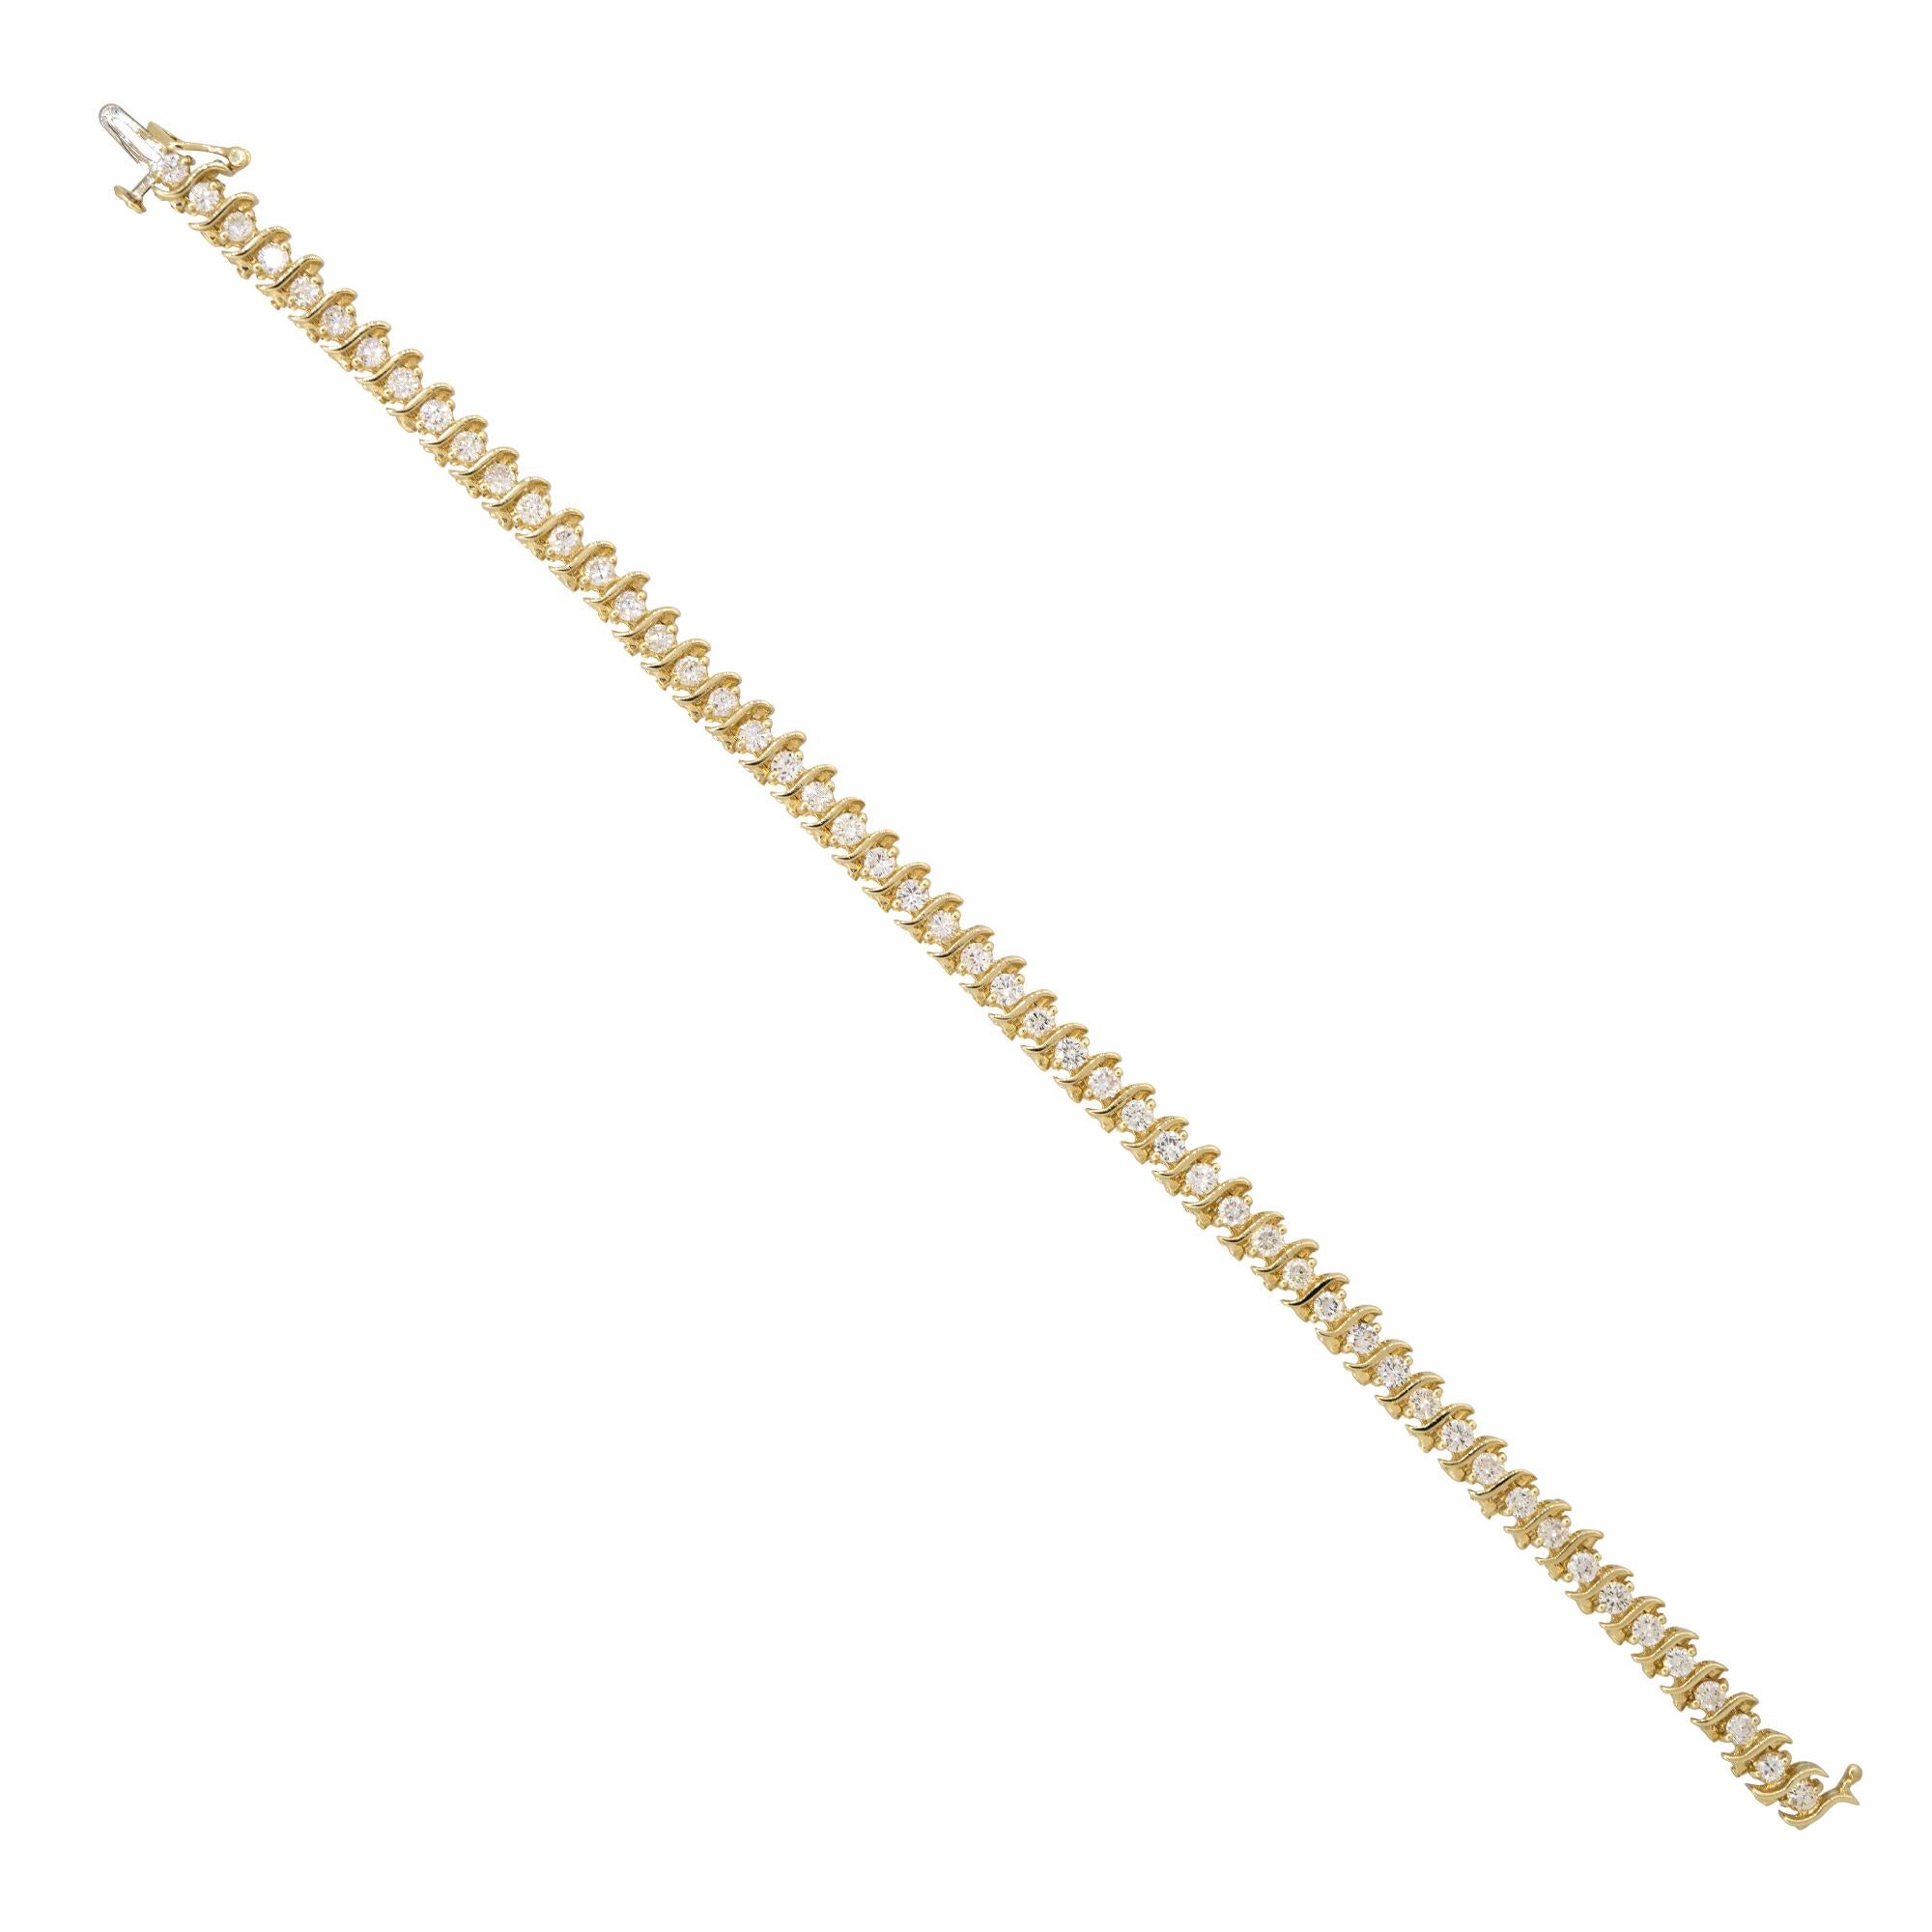 14 Karat Yellow Gold 3.5 Carat Round Brilliant Cut Diamond S-Link Tennis Bracelet
Material: 14k Yellow Gold
Diamond Details: There are approximately 3.5 carats of round brilliant-cut diamonds (52 stones)
Diamond Clarity: All diamonds are